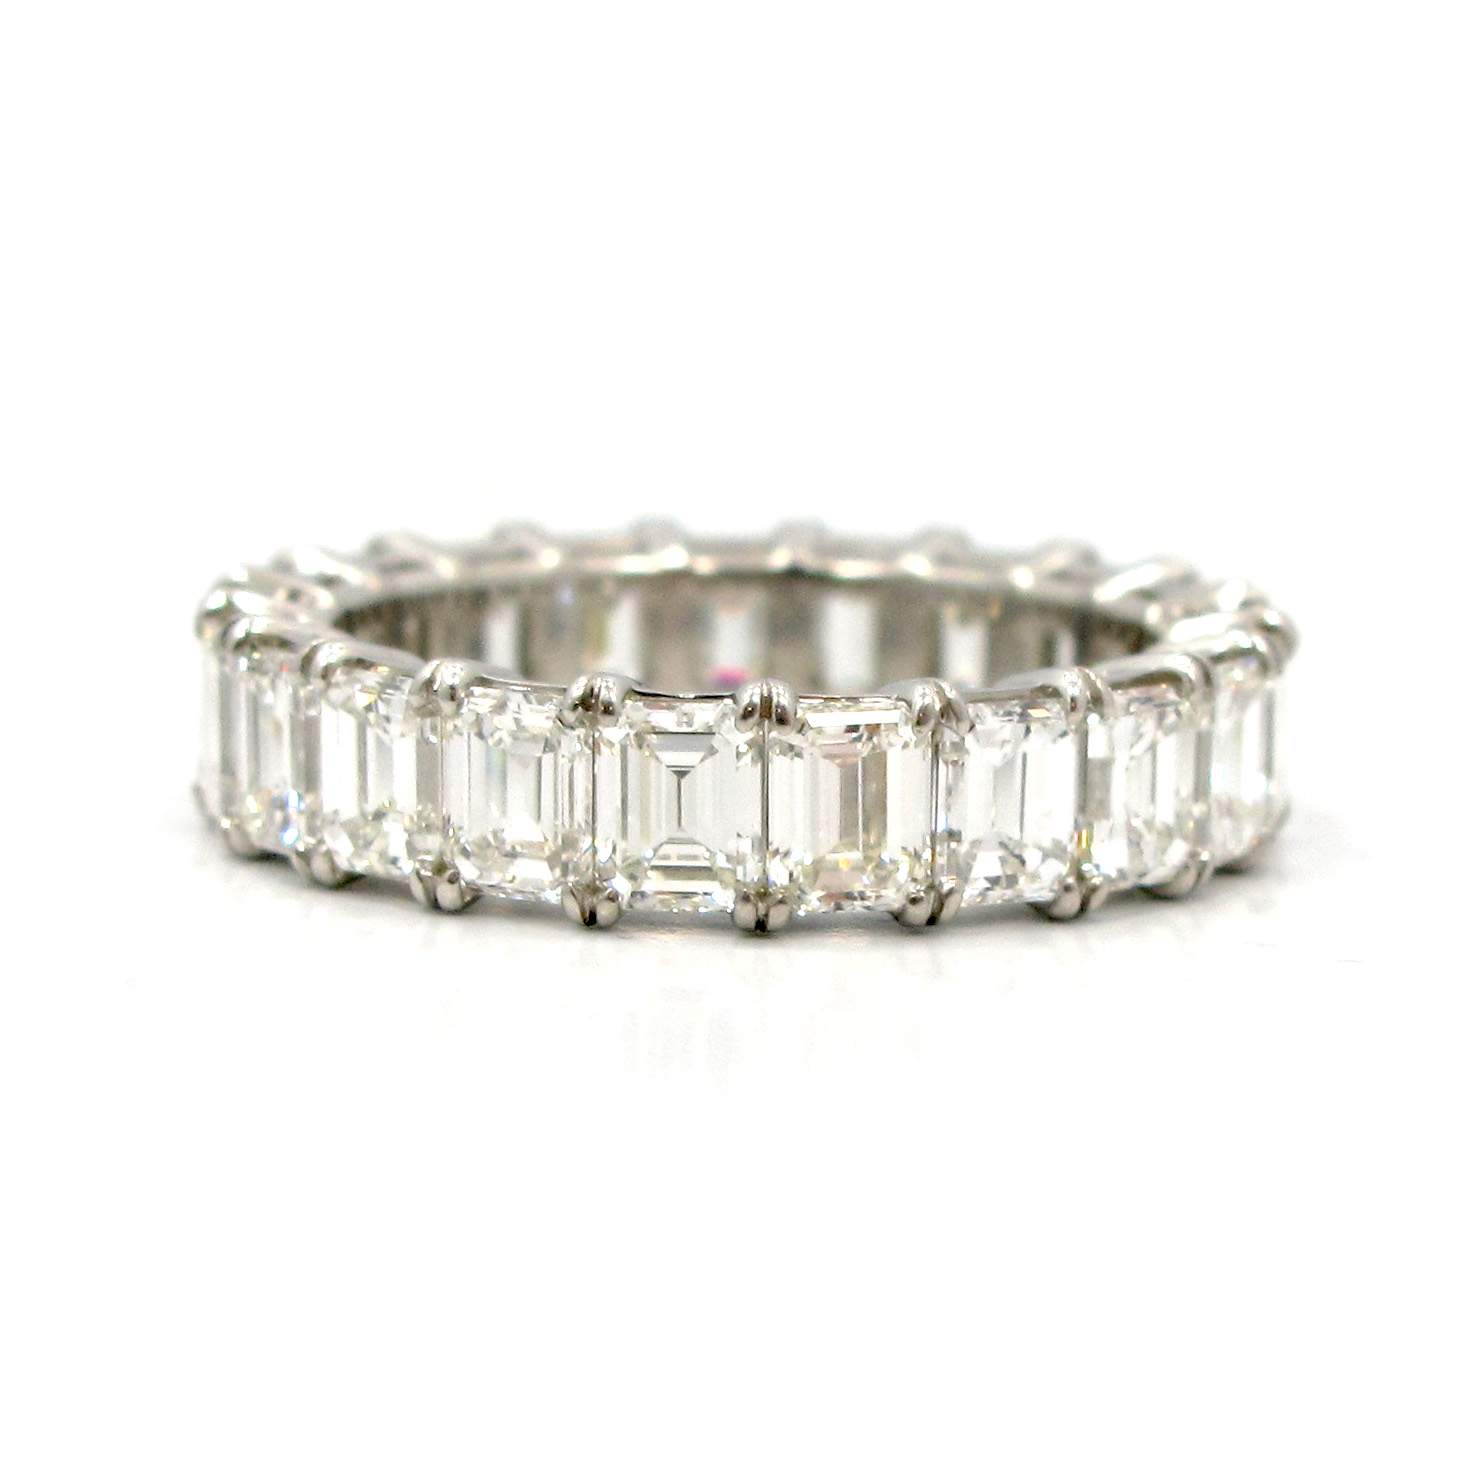 This is a picture of an Emerald Cut Diamond Eternity Band in Platinum